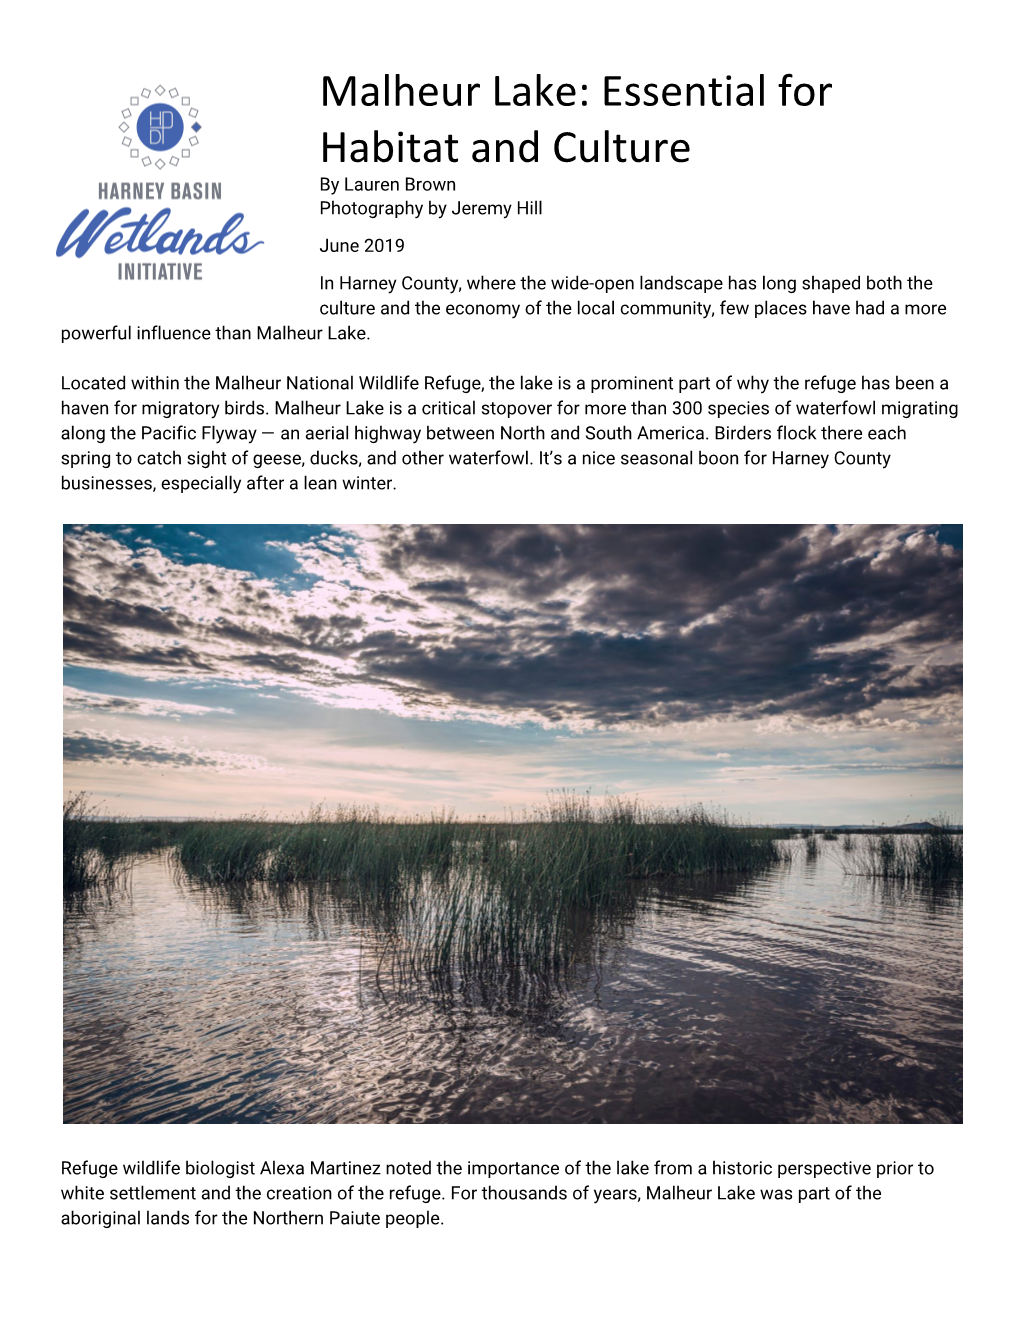 Malheur Lake: Essential for Habitat and Culture by Lauren Brown Photography by Jeremy Hill